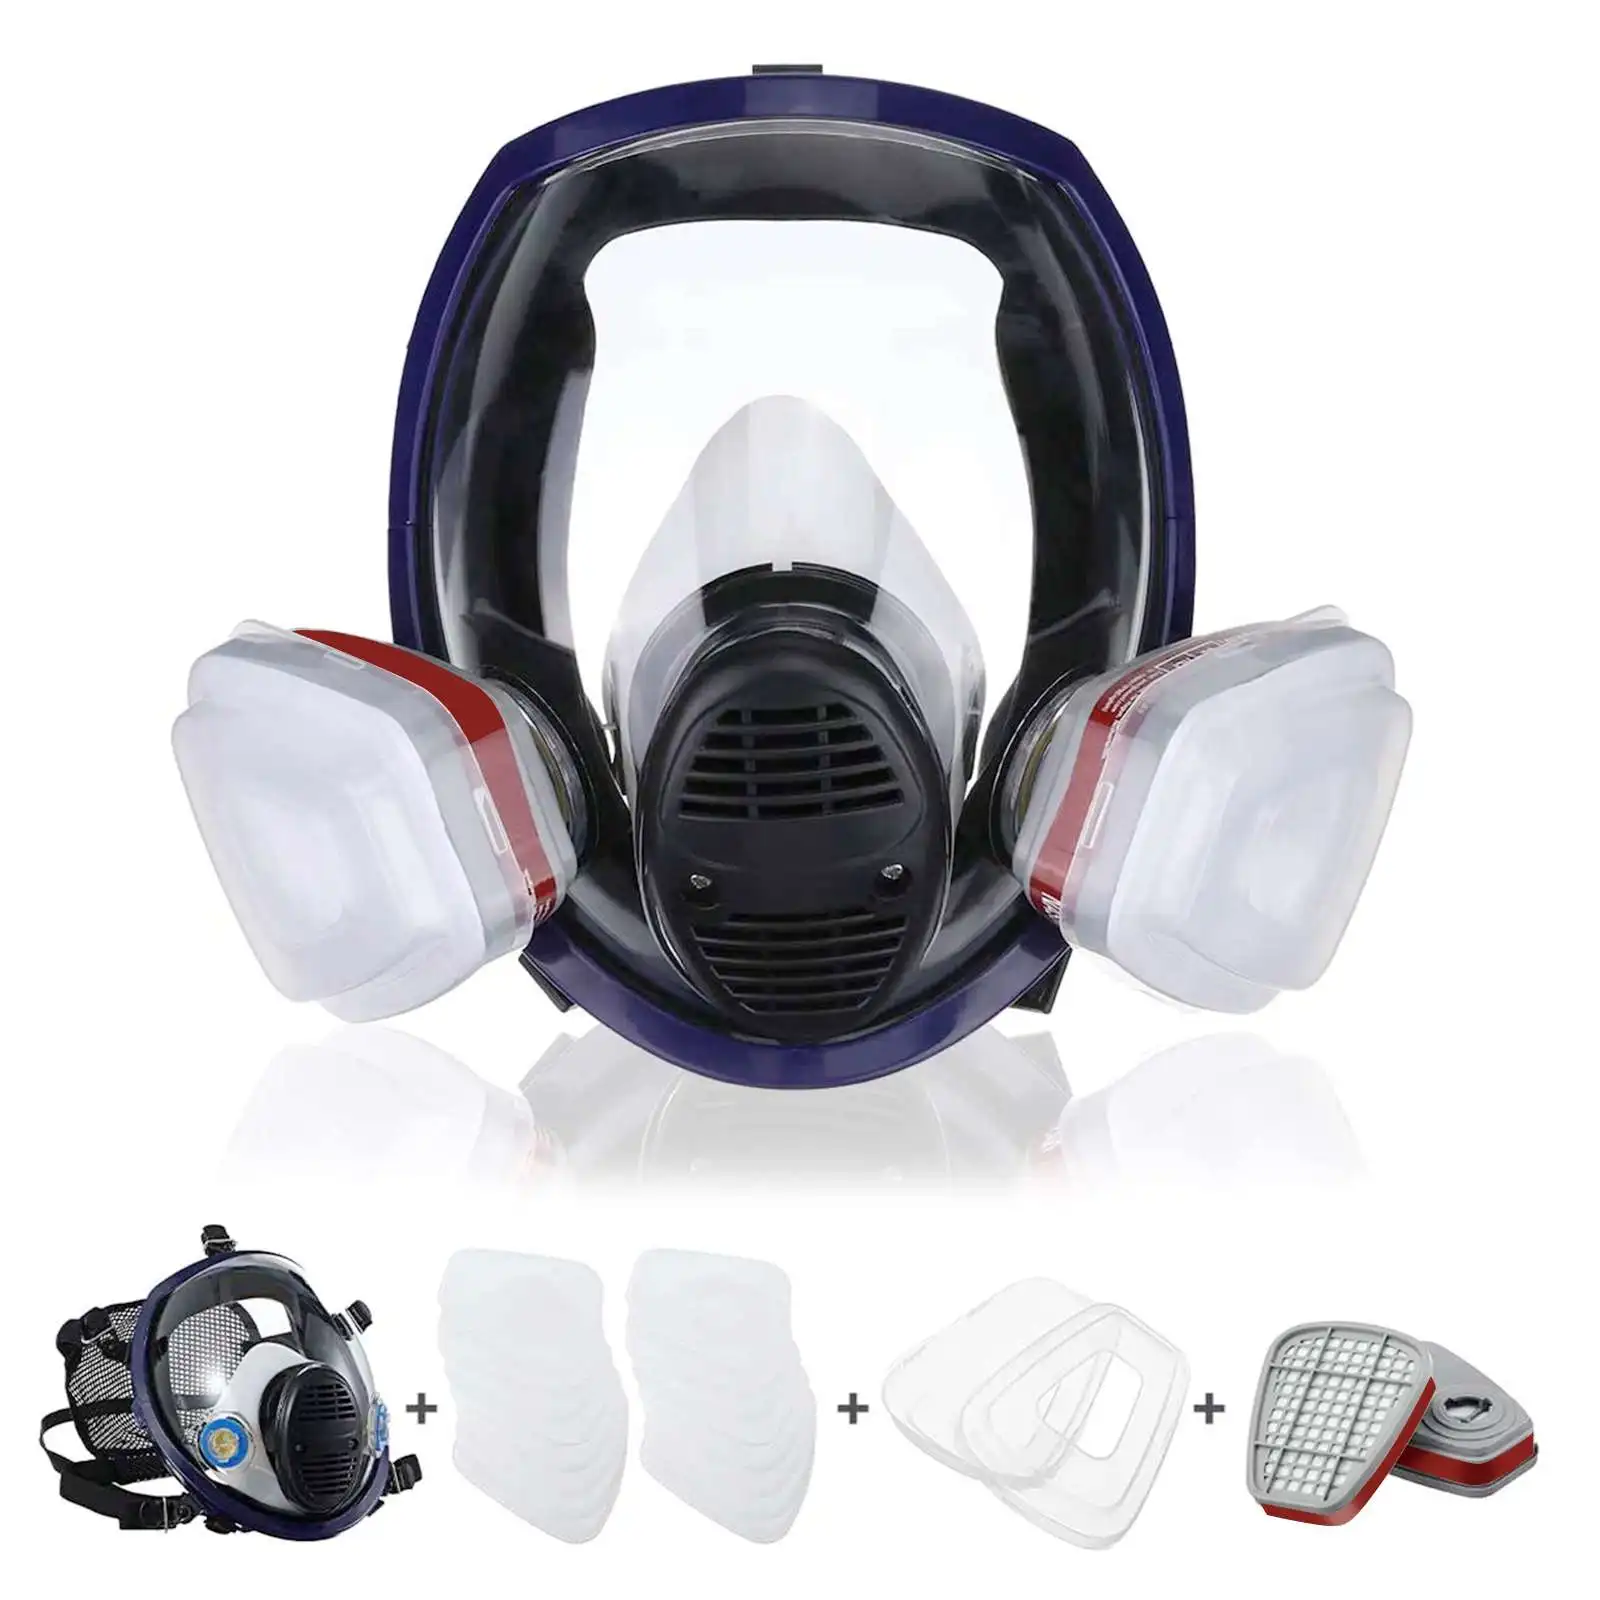 

21-In-1 202B Dust Gas Mask With Safety Goggles Half Face Gas Respirator For Painting Spraying Polishing Work Safety 16 Filters